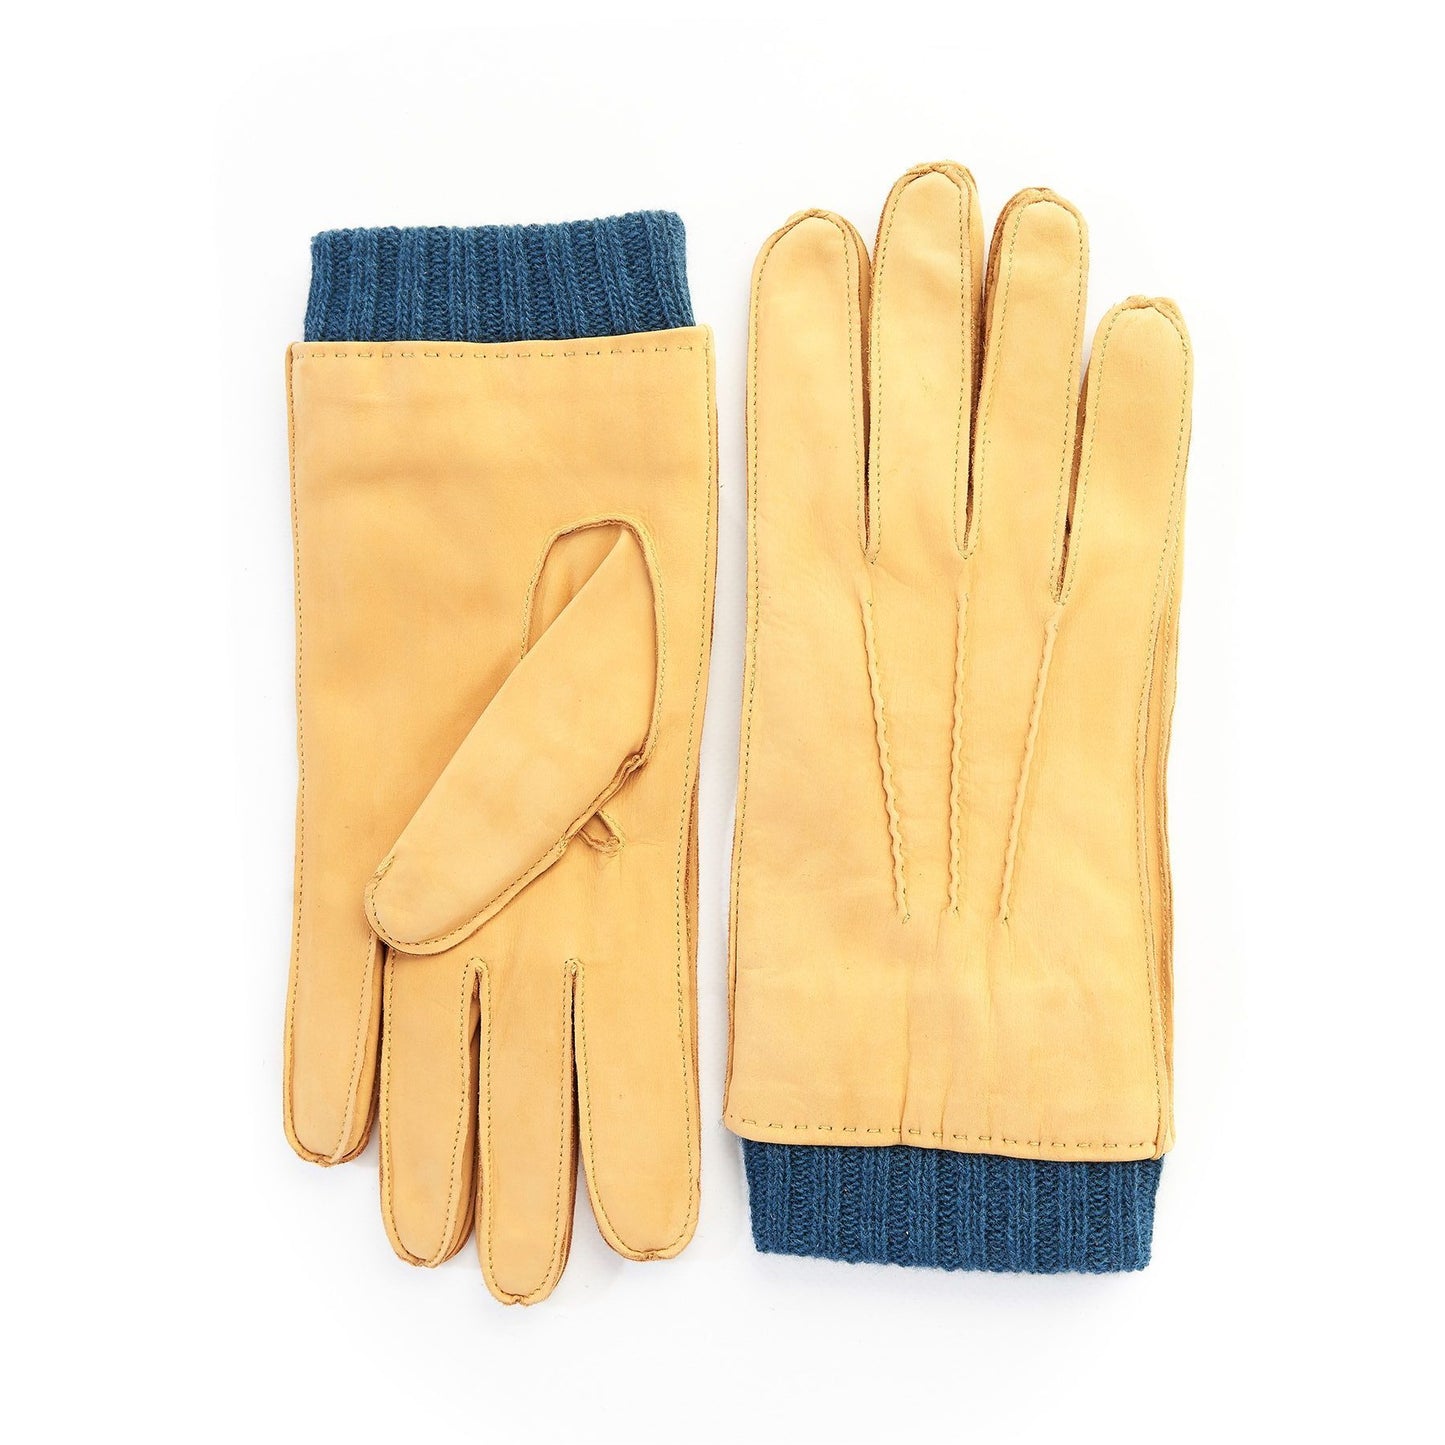 Men's nubuk gloves in yellow color with petrol cashmere lining with cuff